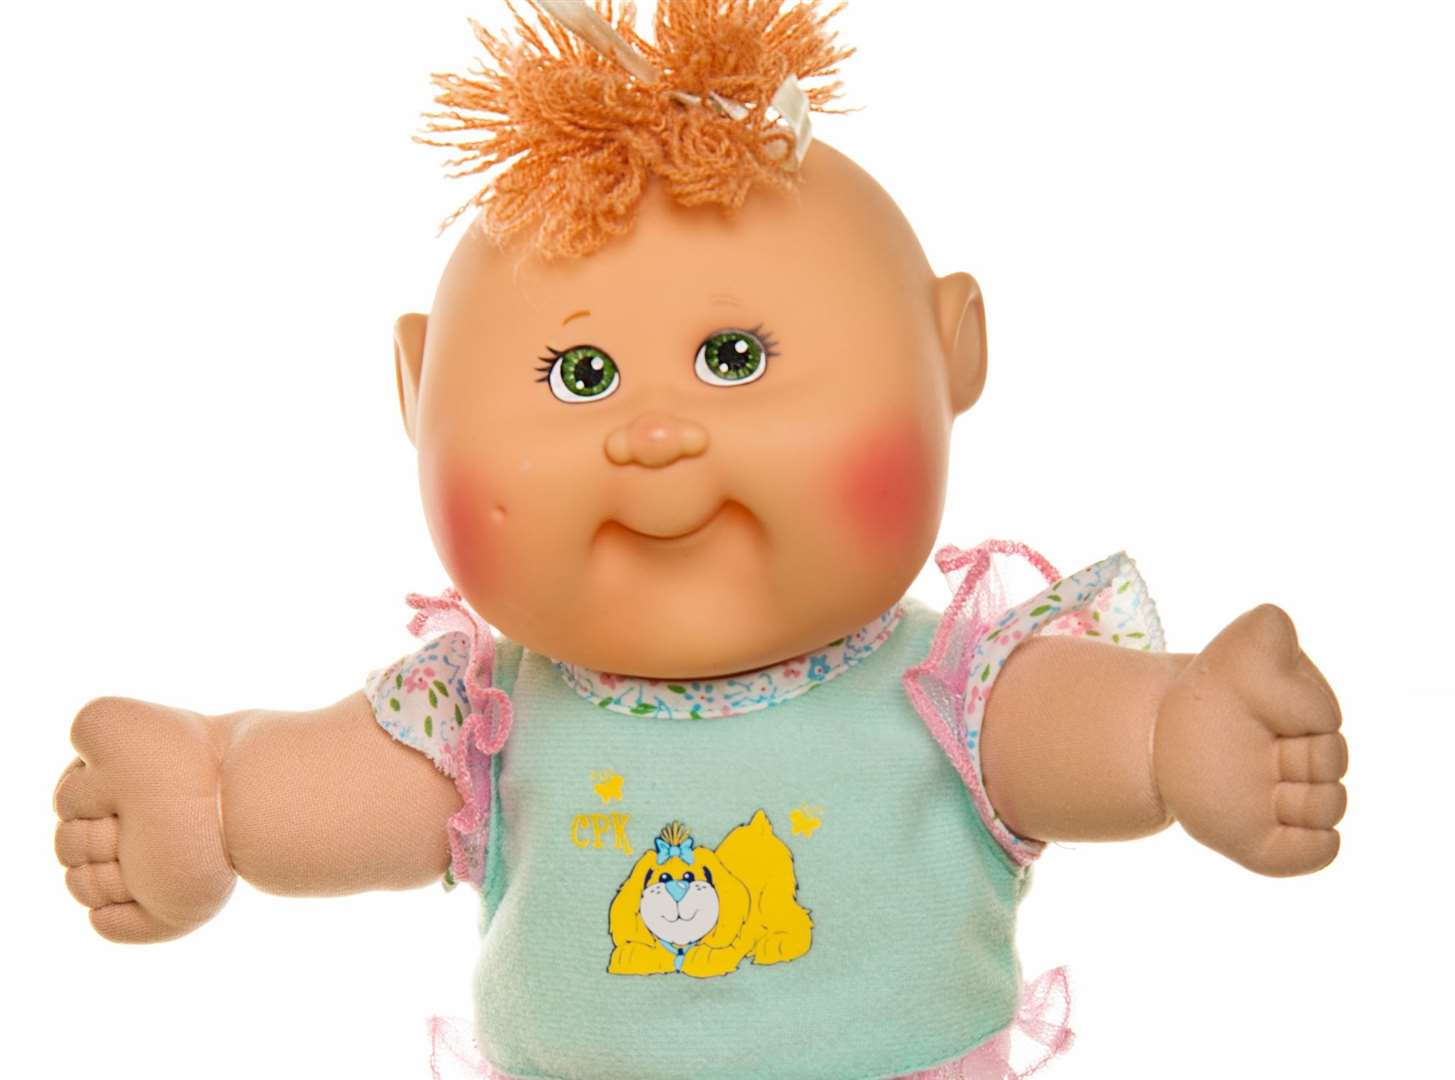 Cabbage Patch Kids burst onto toy shelves in the 1980s breaking all records. Image: iStock.